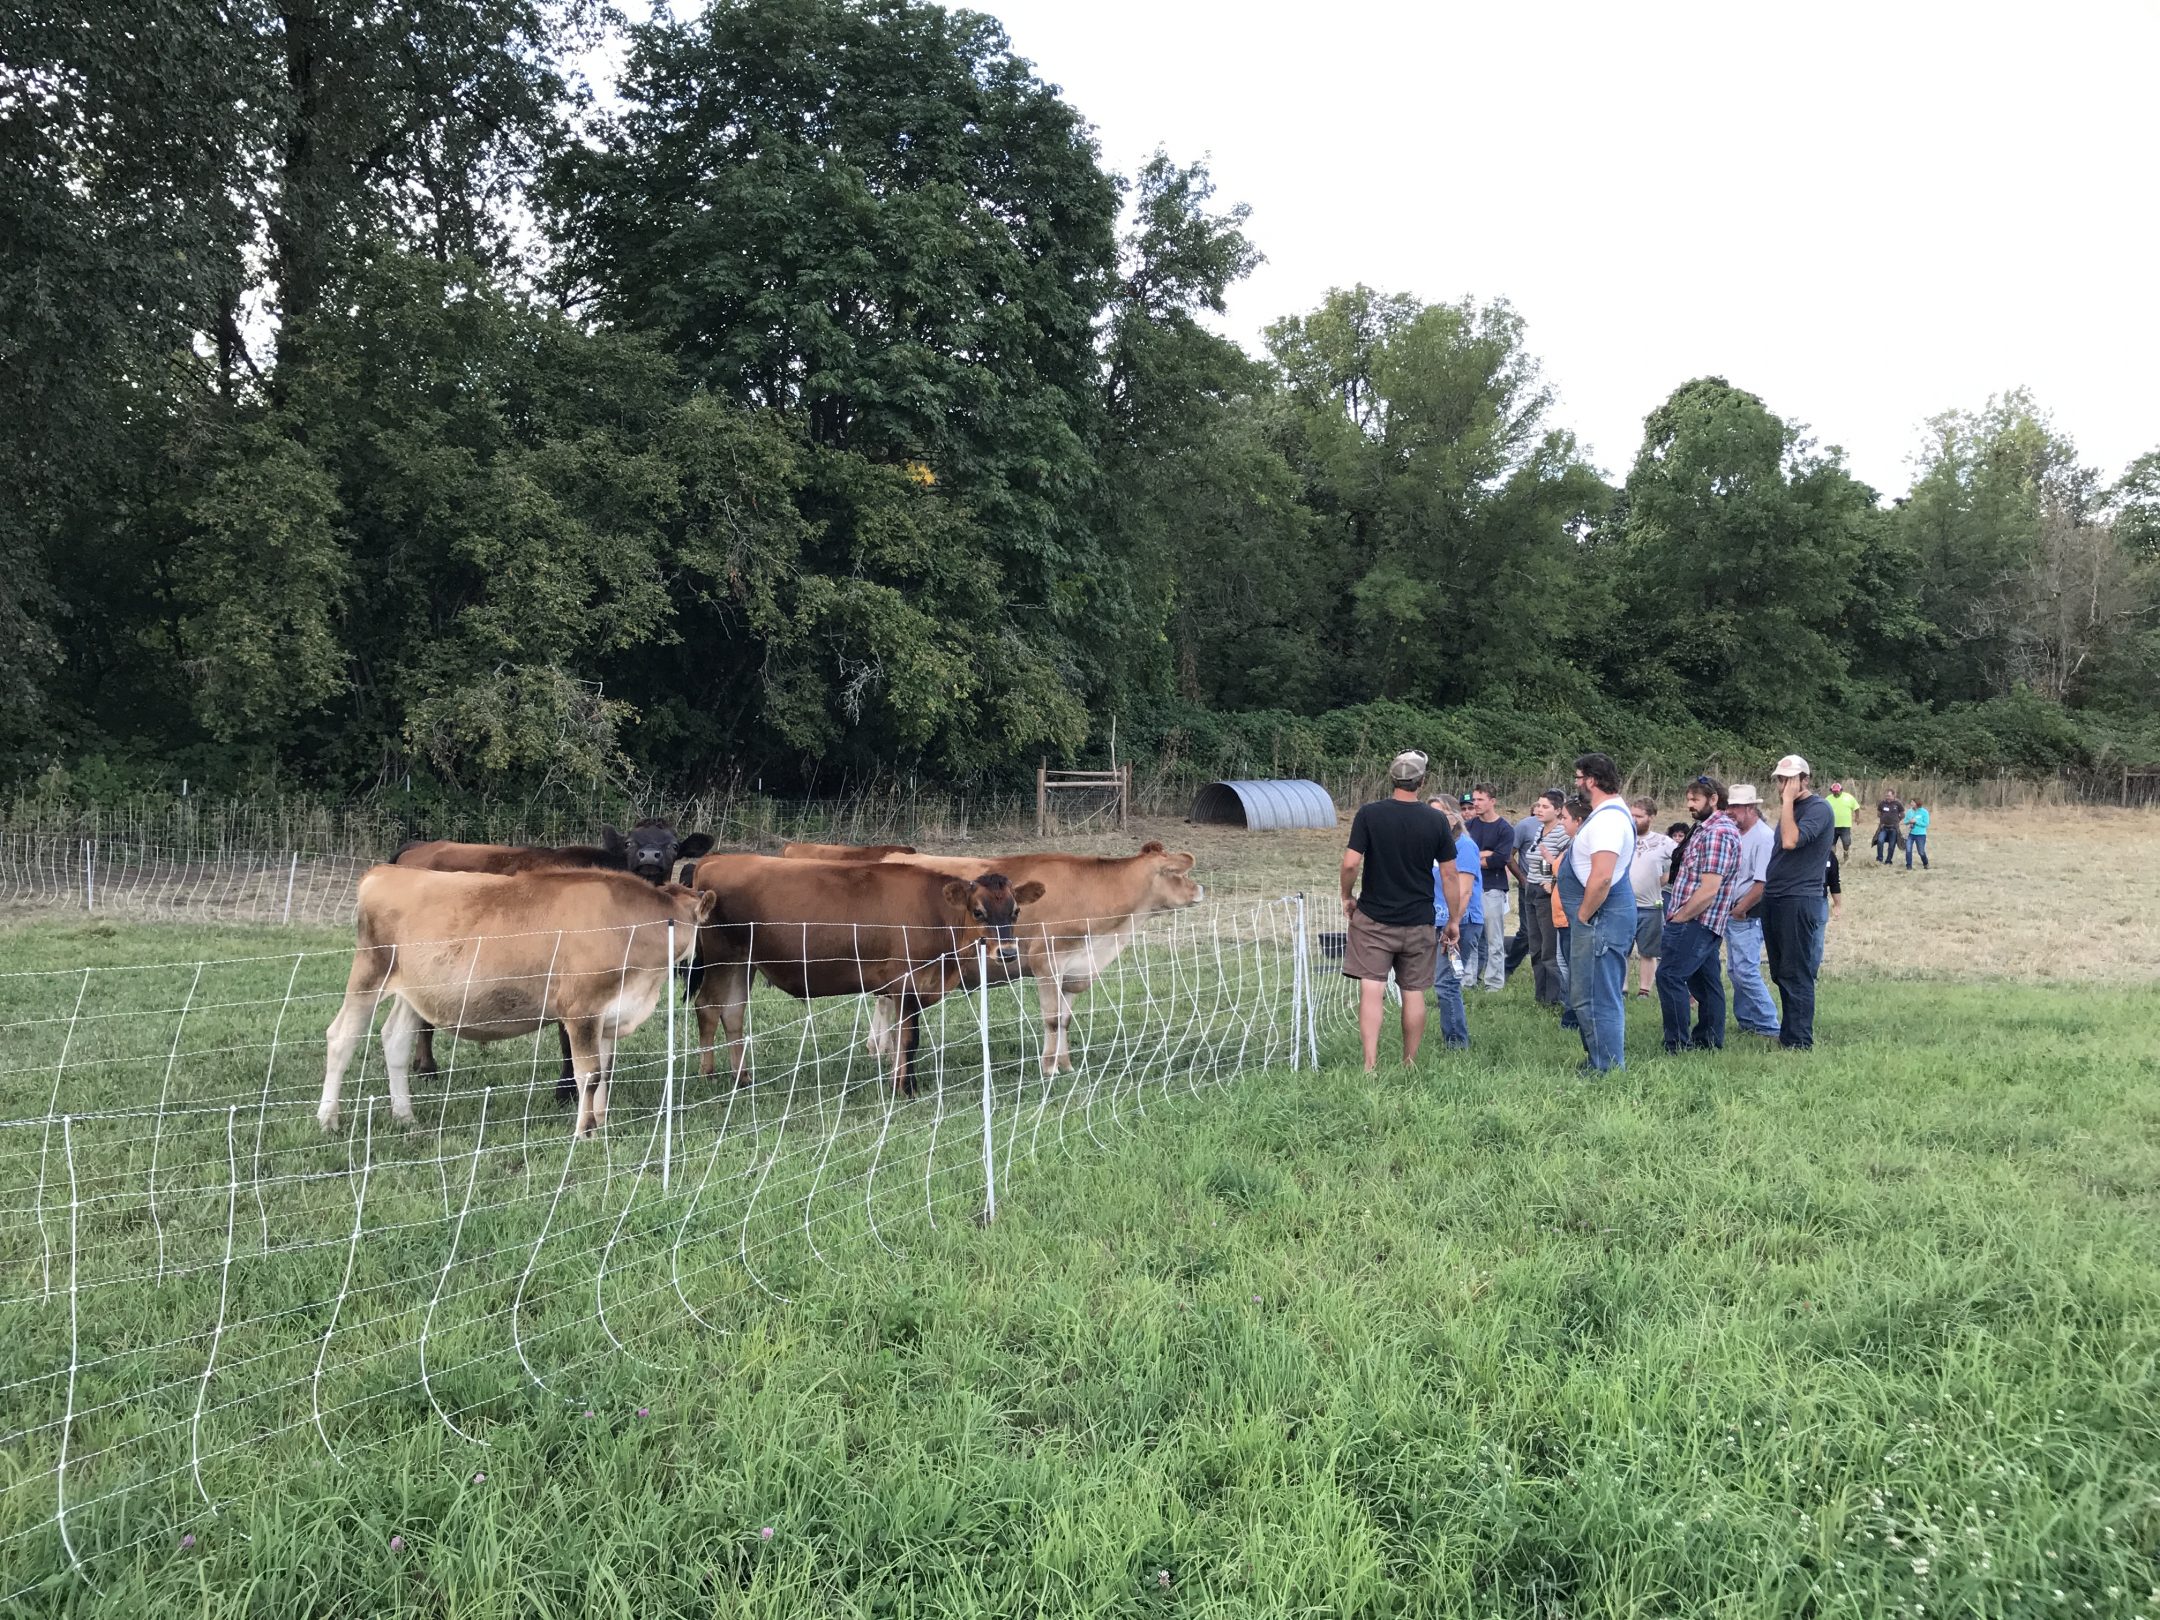 People looking at cows in a pasture